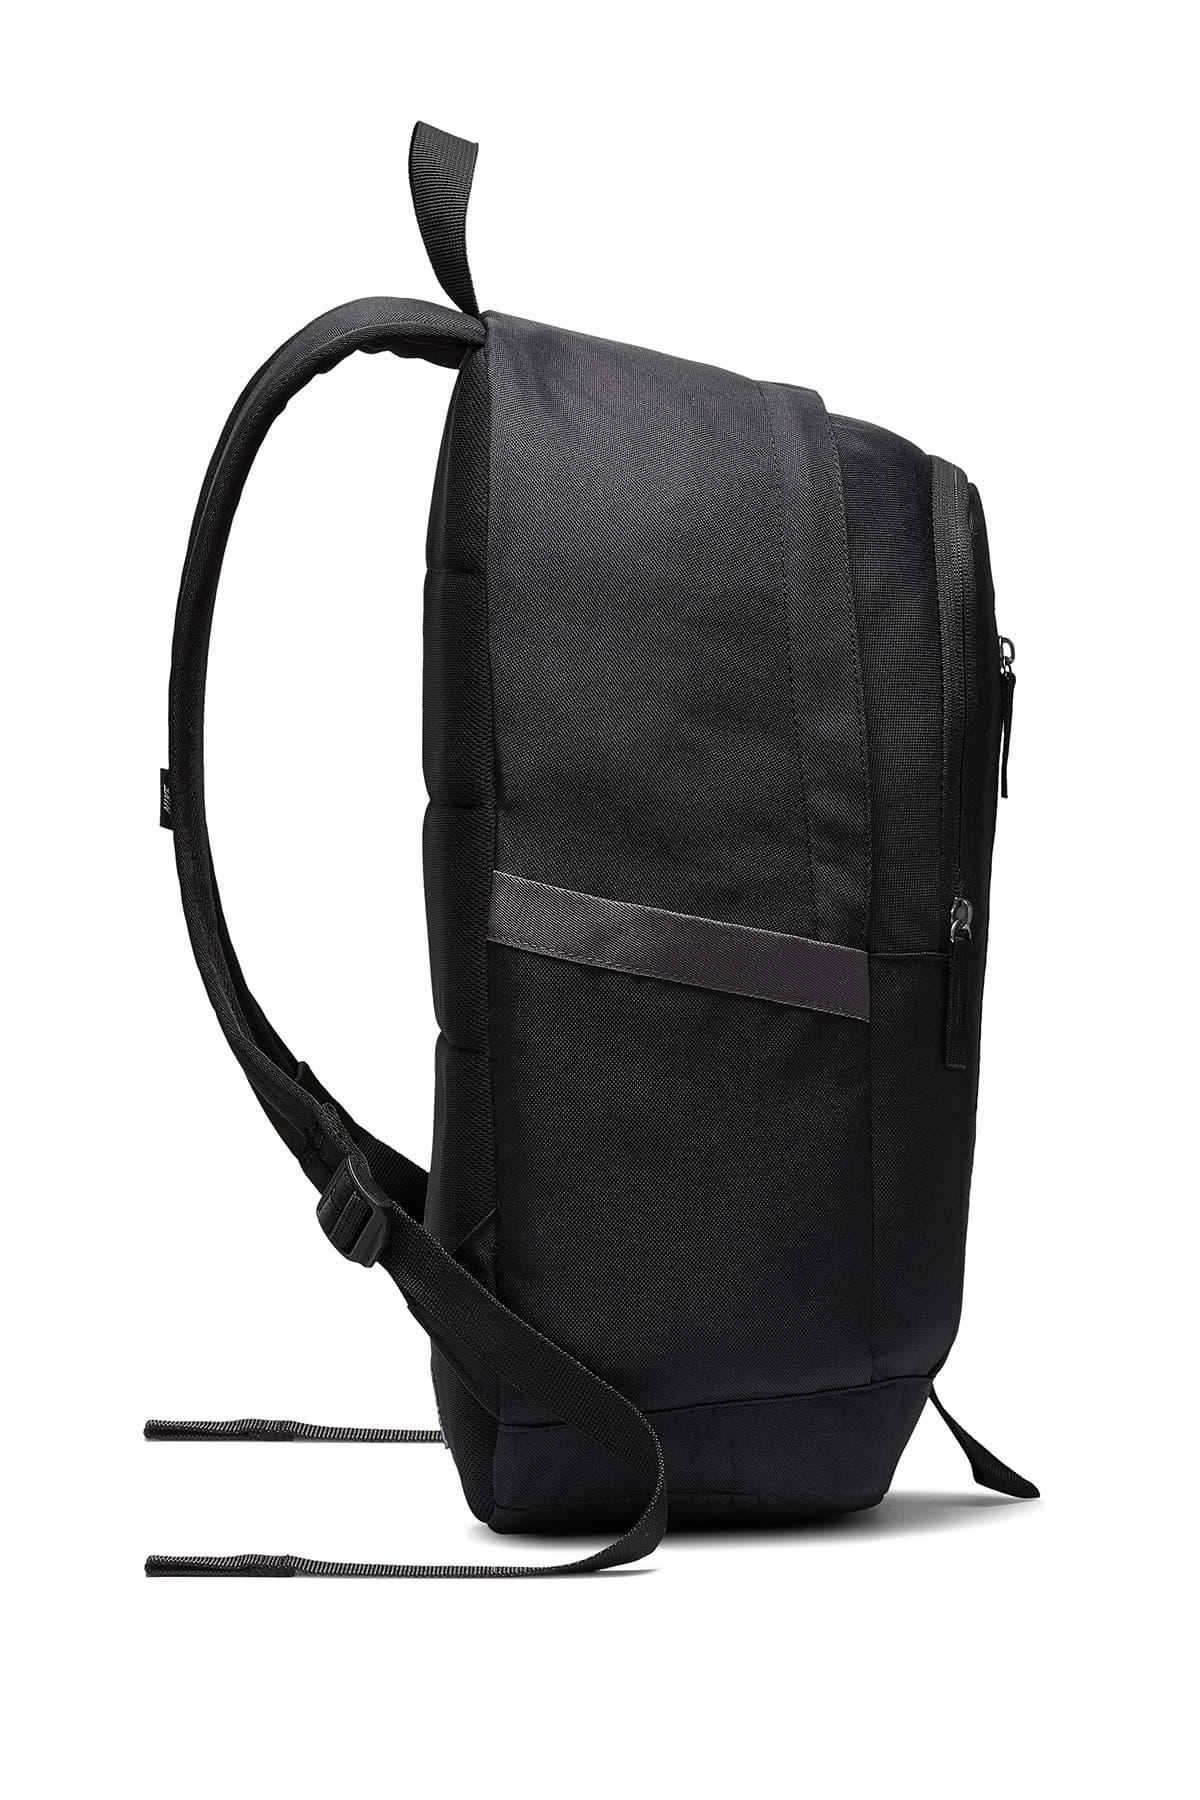 Nike All Access Soleday Backpack in Black Lyst